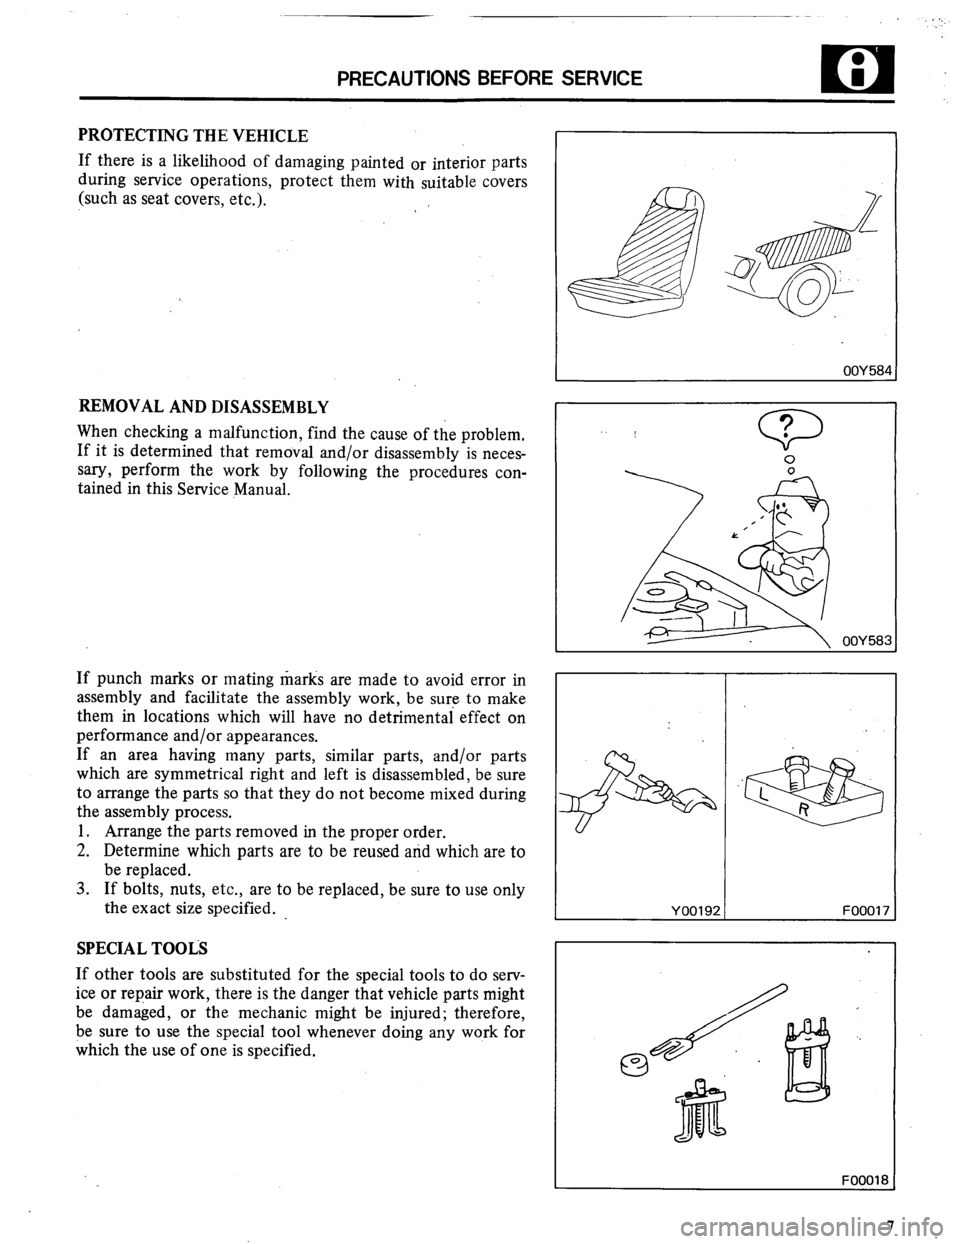 MITSUBISHI MONTERO 1984 1.G Workshop Manual PRECAUTIONS BEFORE SERVICE 
m i 
PROTECTING THE VEHICLE 
If there is a likelihood of damaging painted or interior parts 
during service operations, protect them with suitable covers 
(such as seat cov